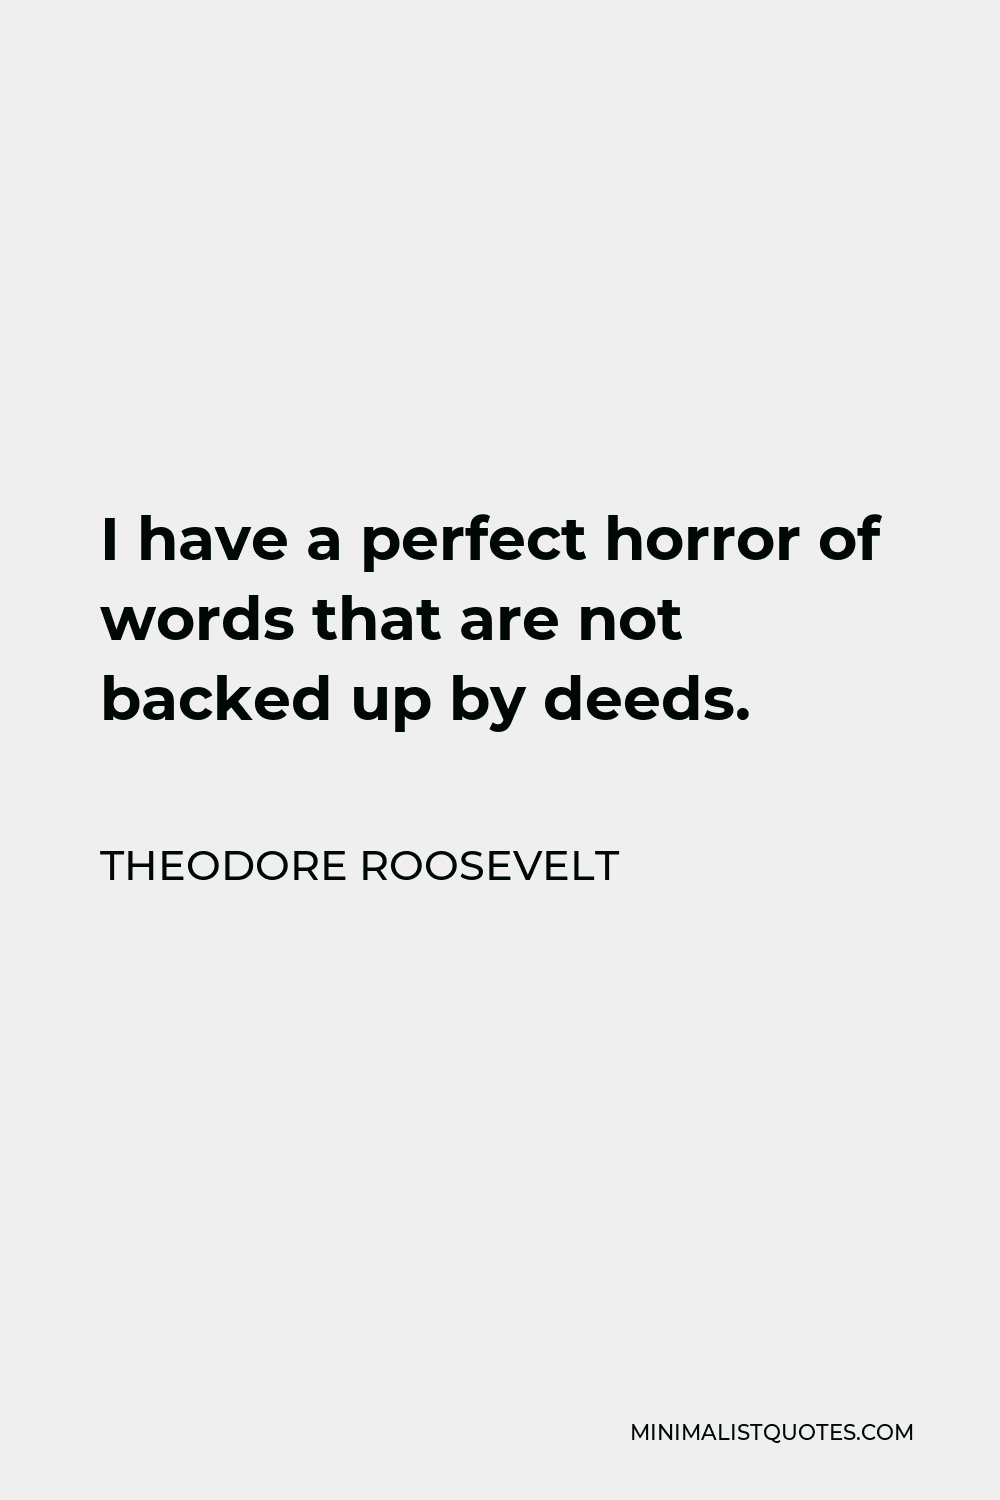 Theodore Roosevelt Quote - I have a perfect horror of words that are not backed up by deeds.